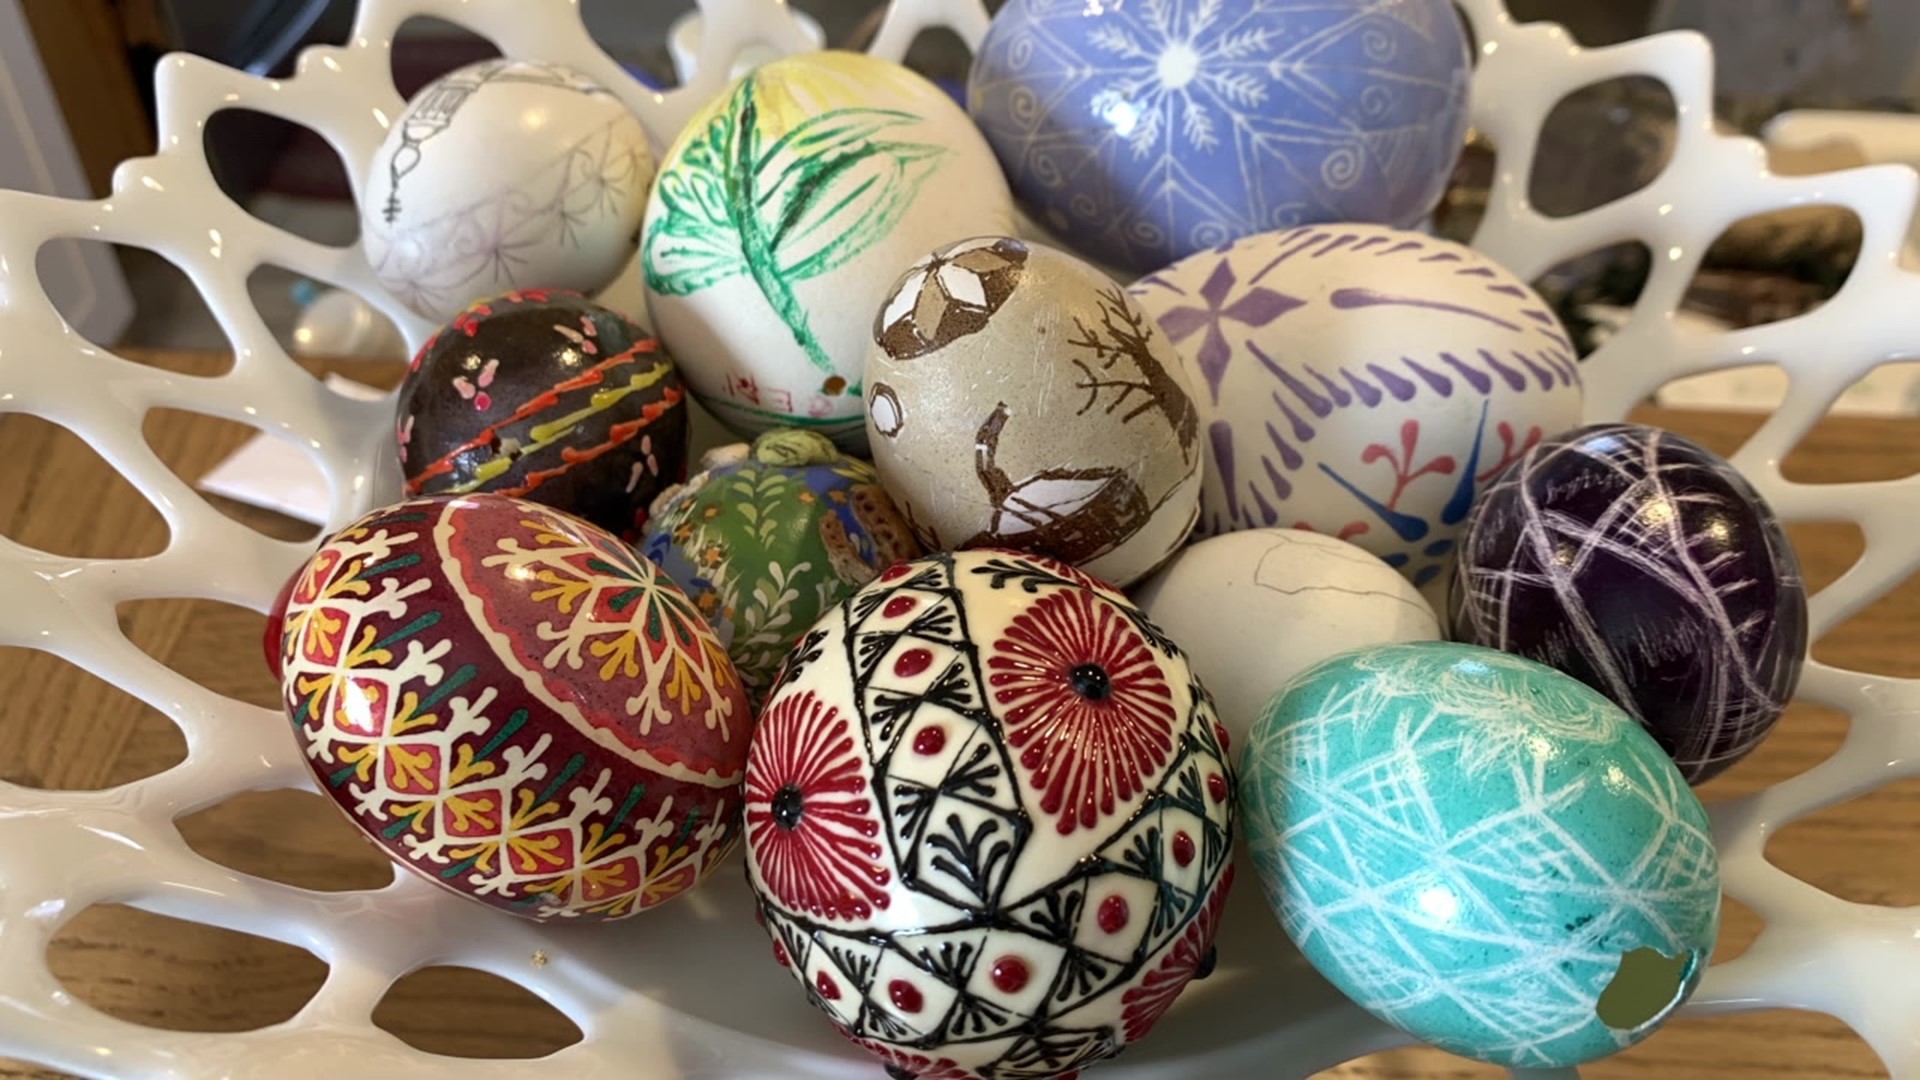 Pysanky eggs are a Ukrainian tradition dating back more than 1,000 years with an important legend.